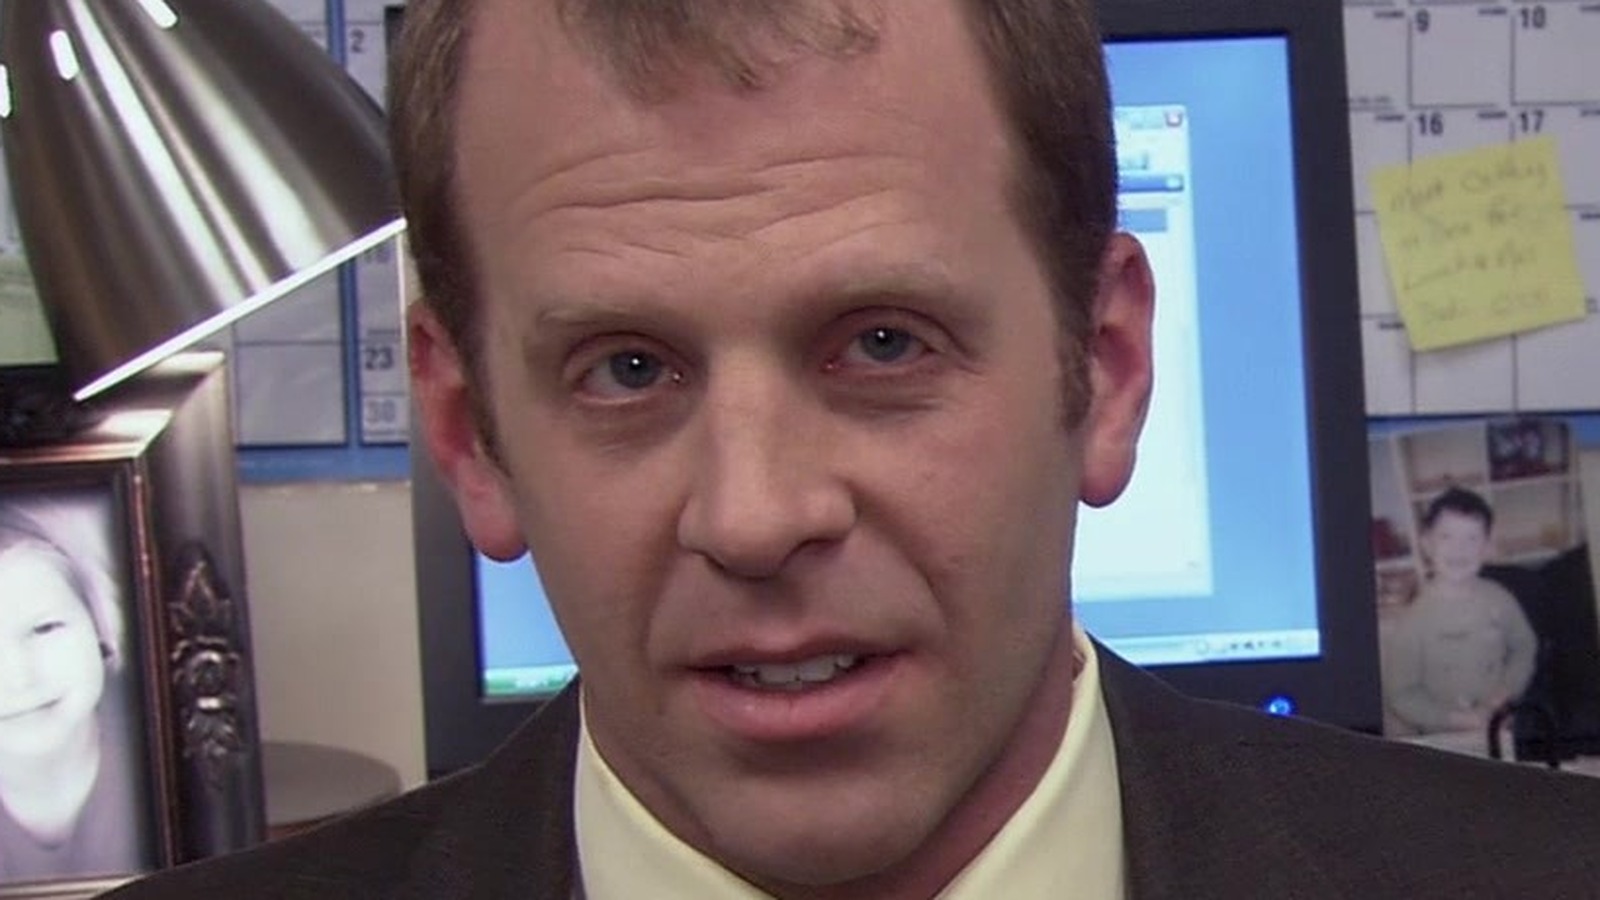 Whatever Happened To Toby From The Office?